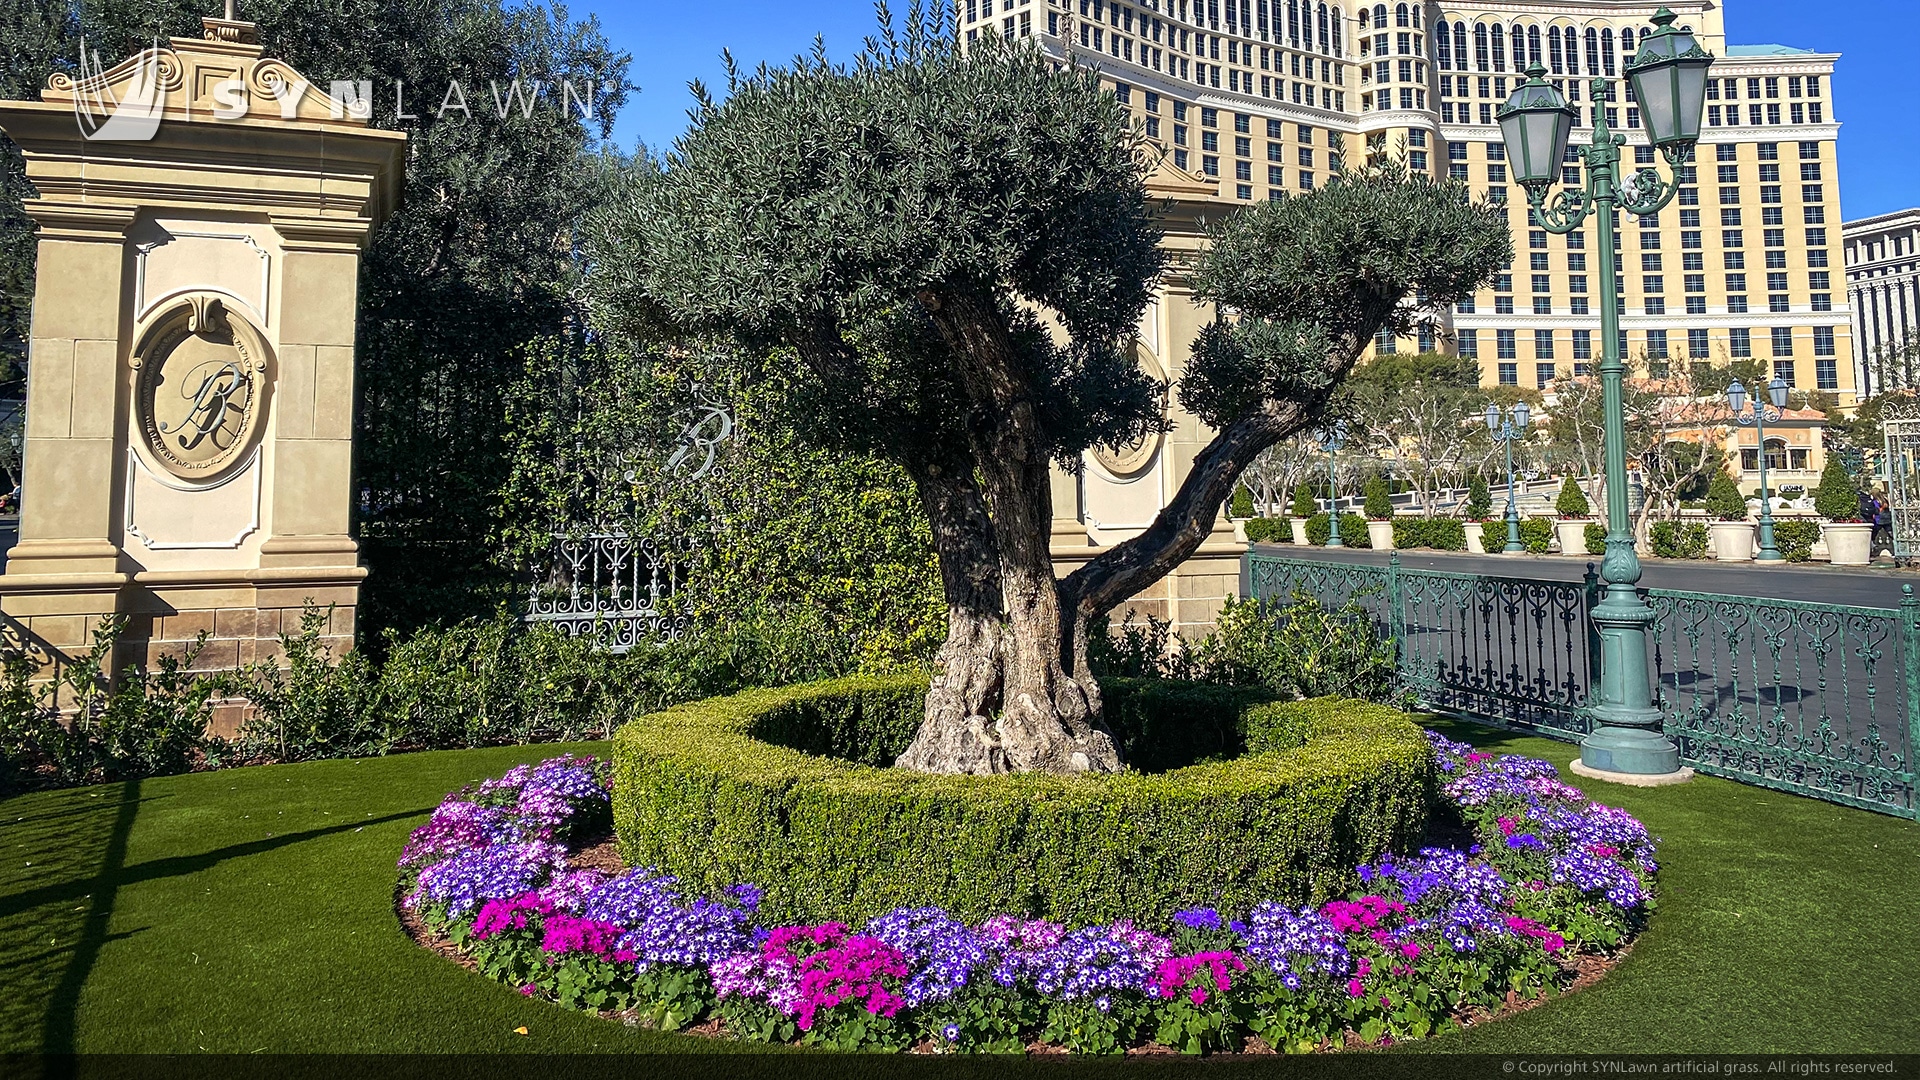 Iconic Bellagio Casino Works Towards Water Conservation